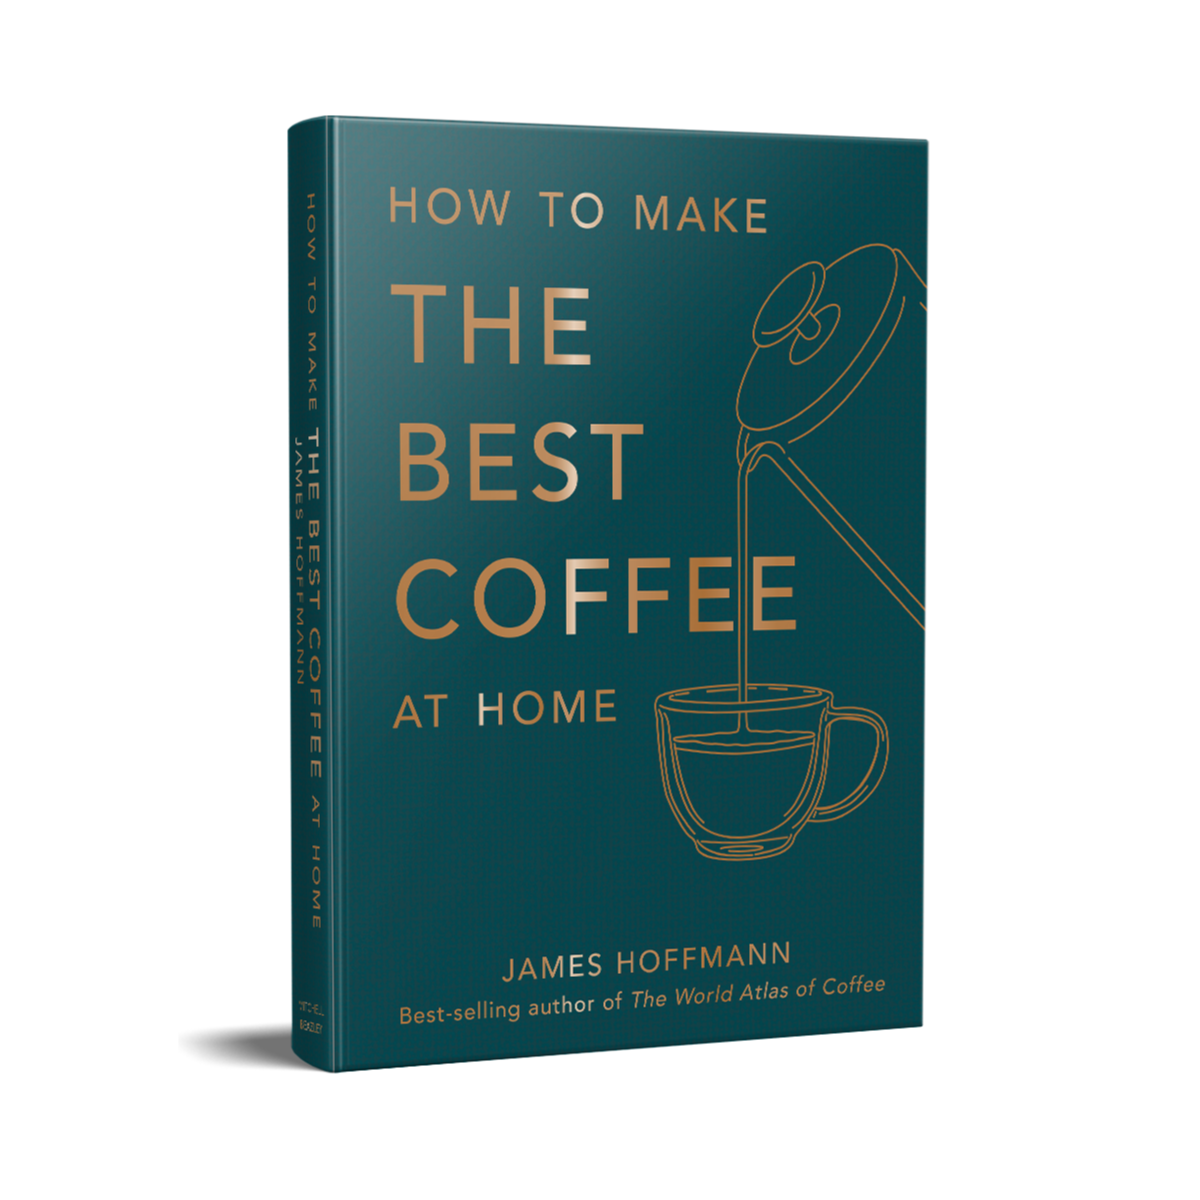 How To Make The Best Coffee At Home - James Hoffmann - (EN)